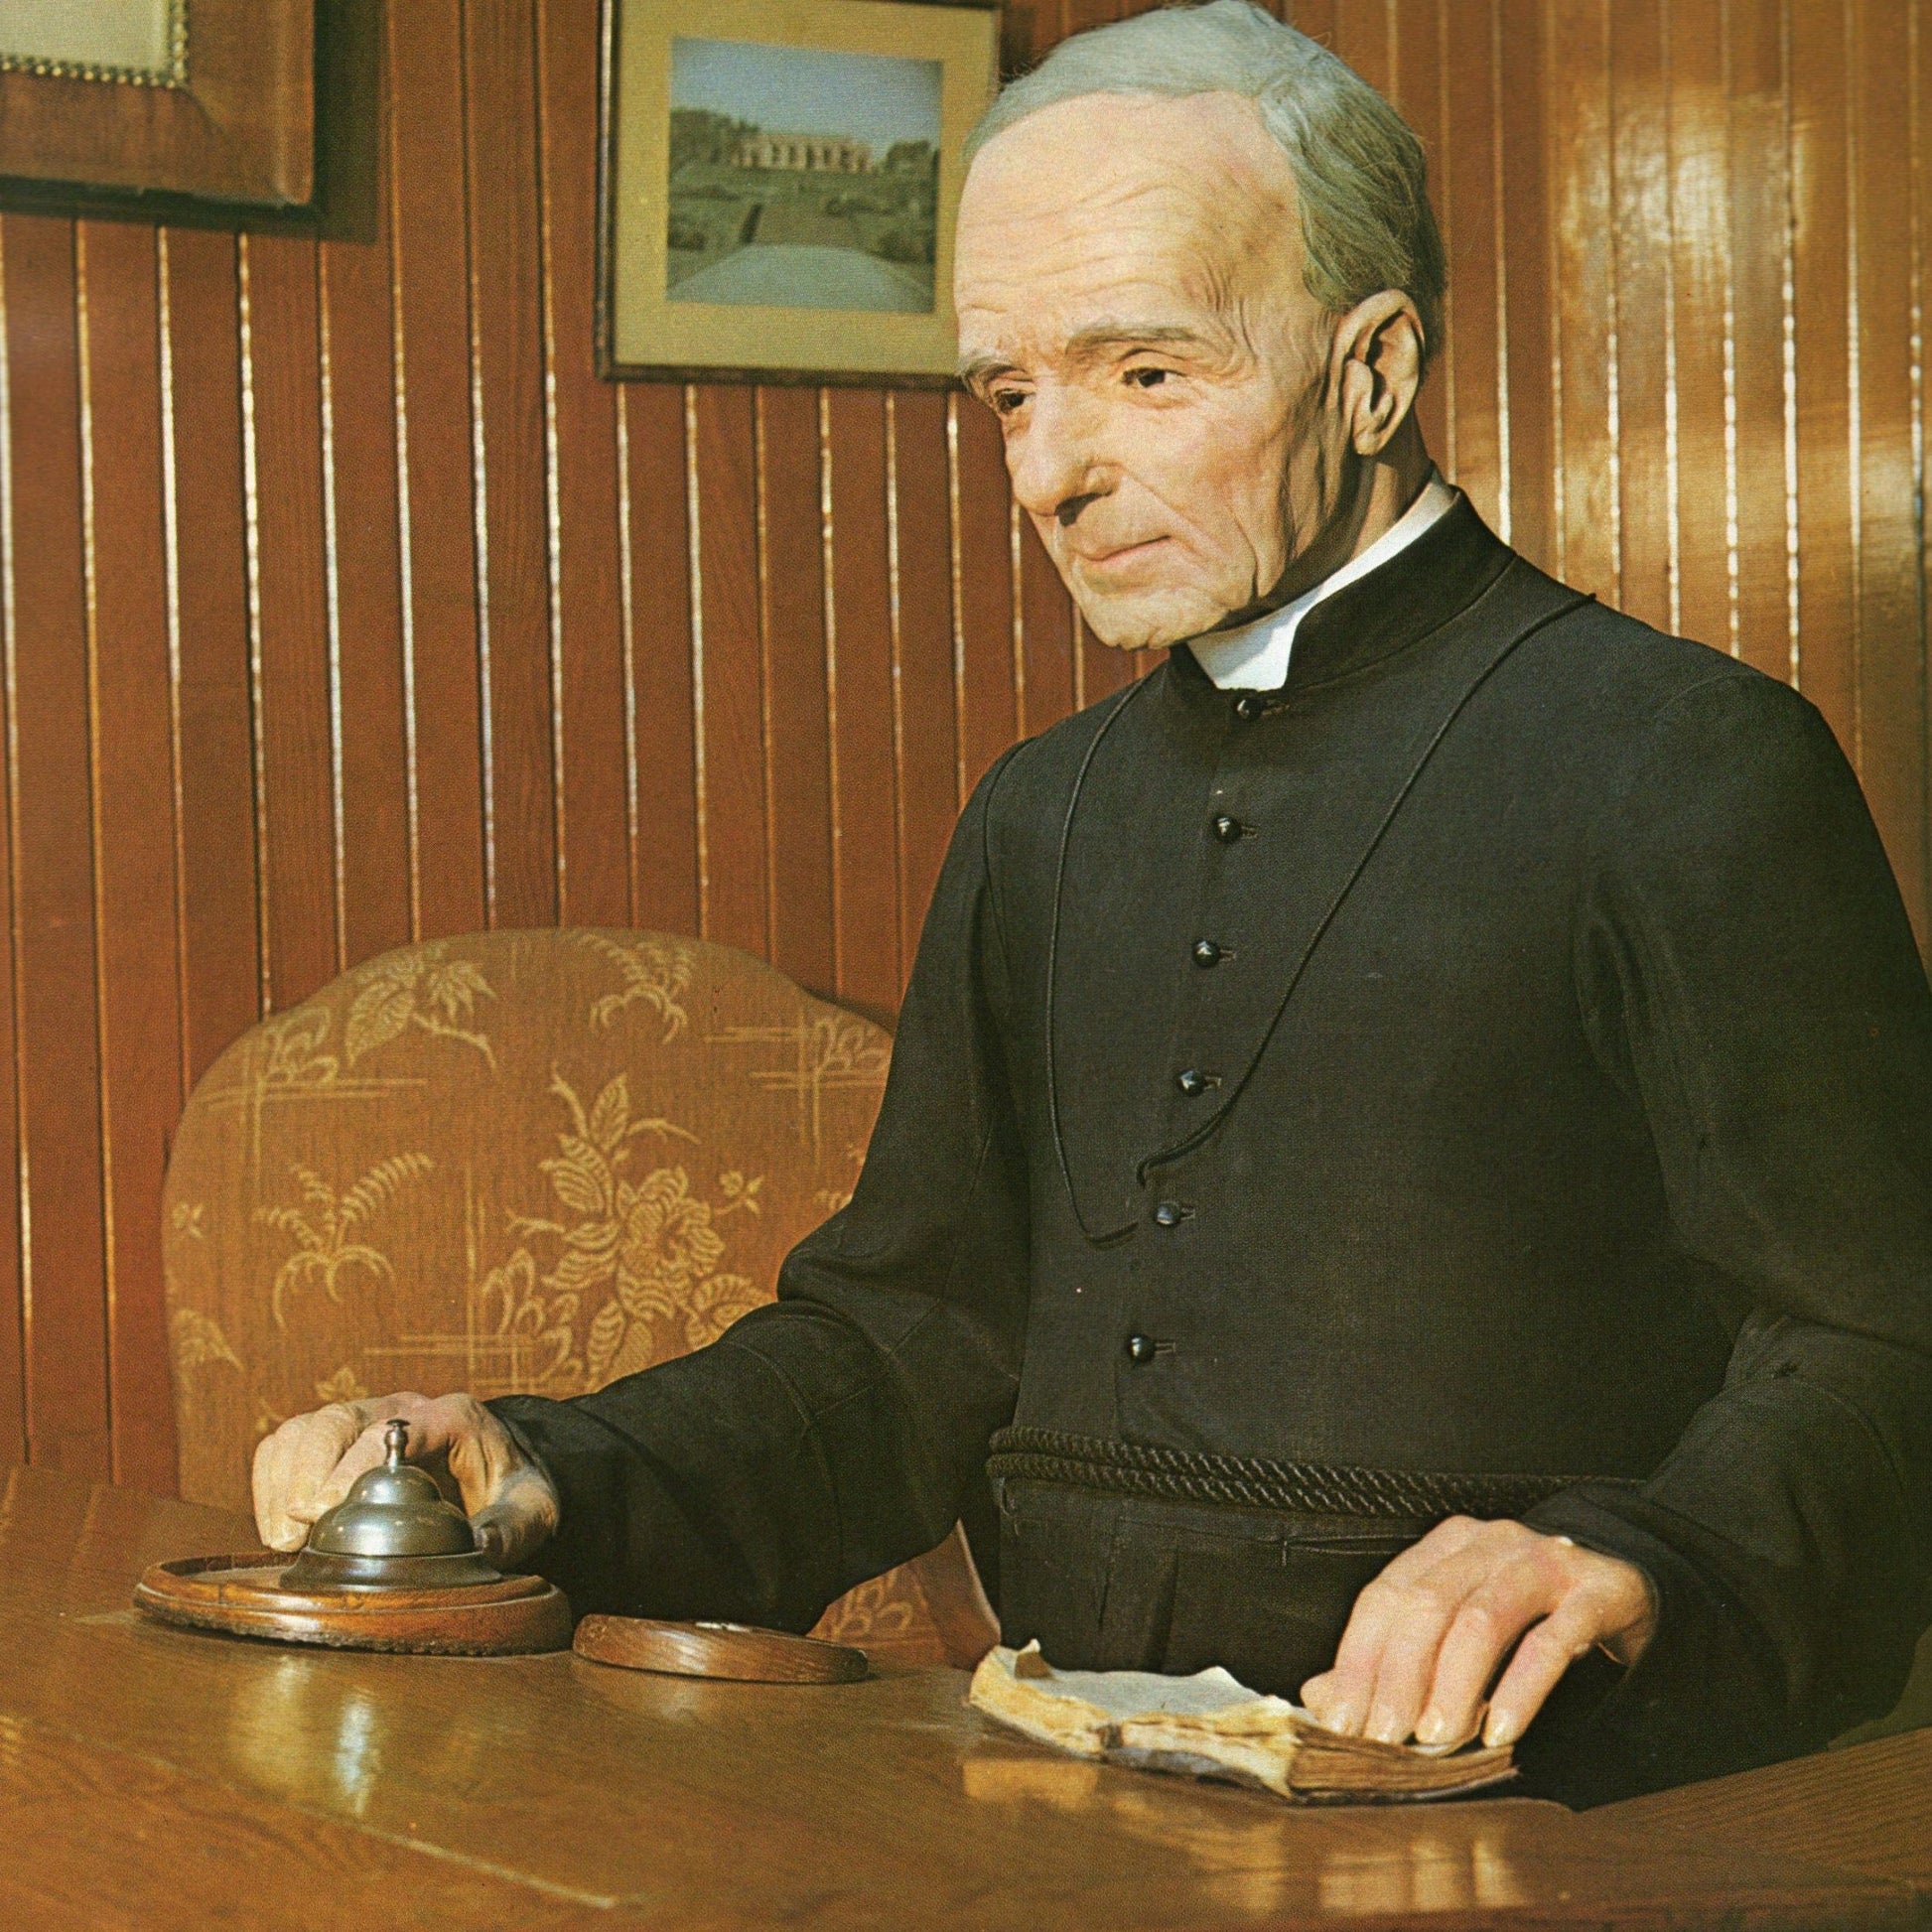 Saint Andre Bessette DVD - Bob and Penny Lord